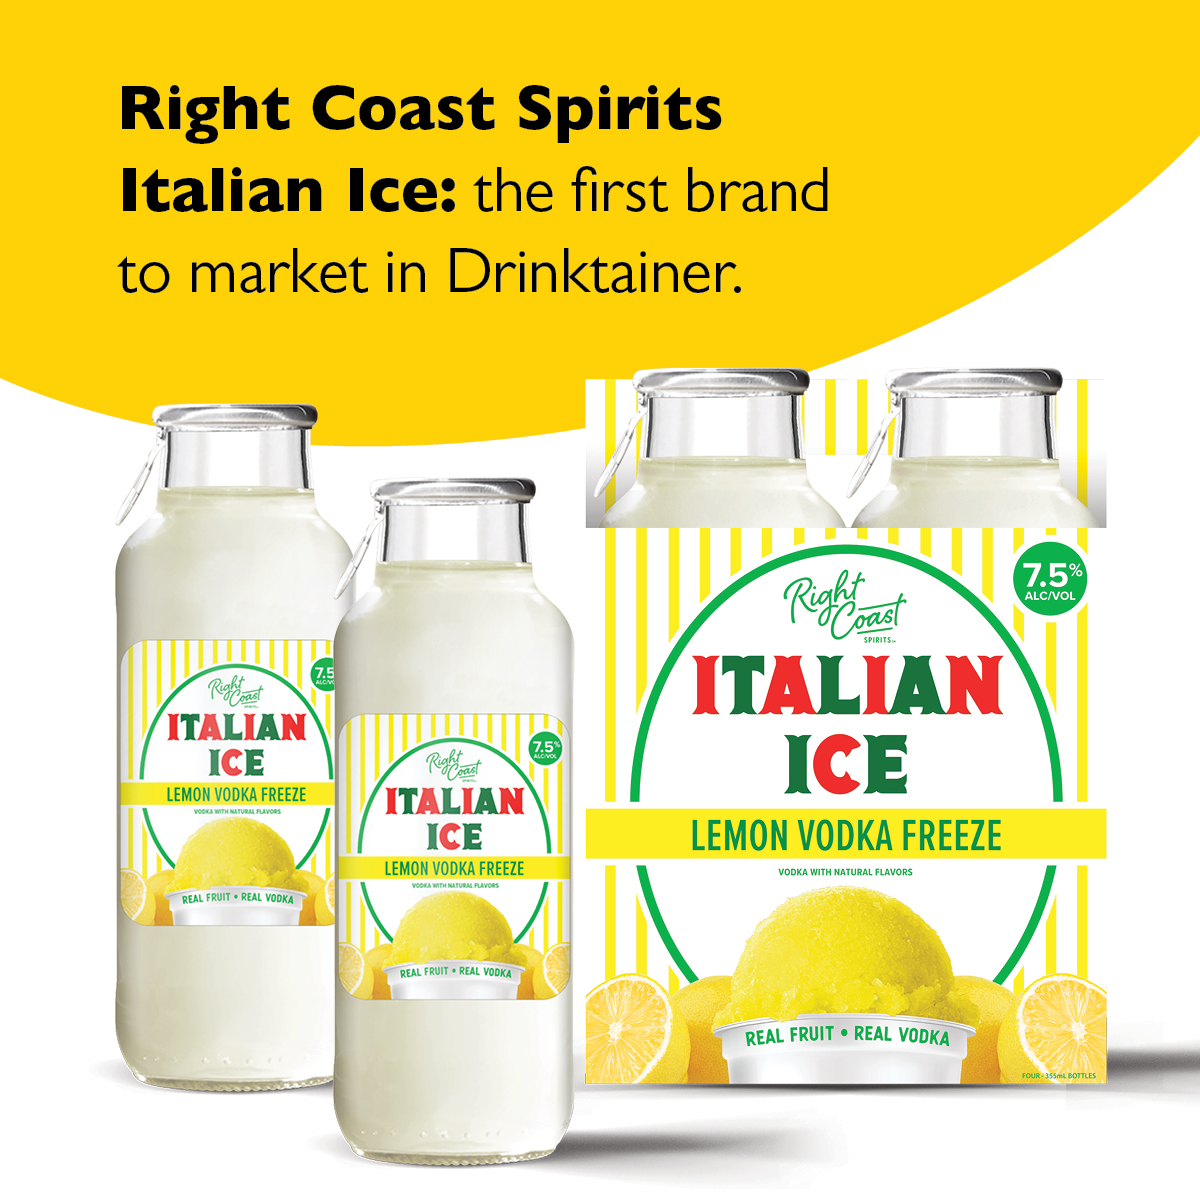 Right Coast Spirits Italian Ice - Lemon Vodka Freeze and Cherry Vodka Chill - will be the first brand to market in Drinktainer™ through our contract packing collaboration with FX Matt. Read more here: ow.ly/exp350RbOqi #innovation #RTDs #Drinktainer